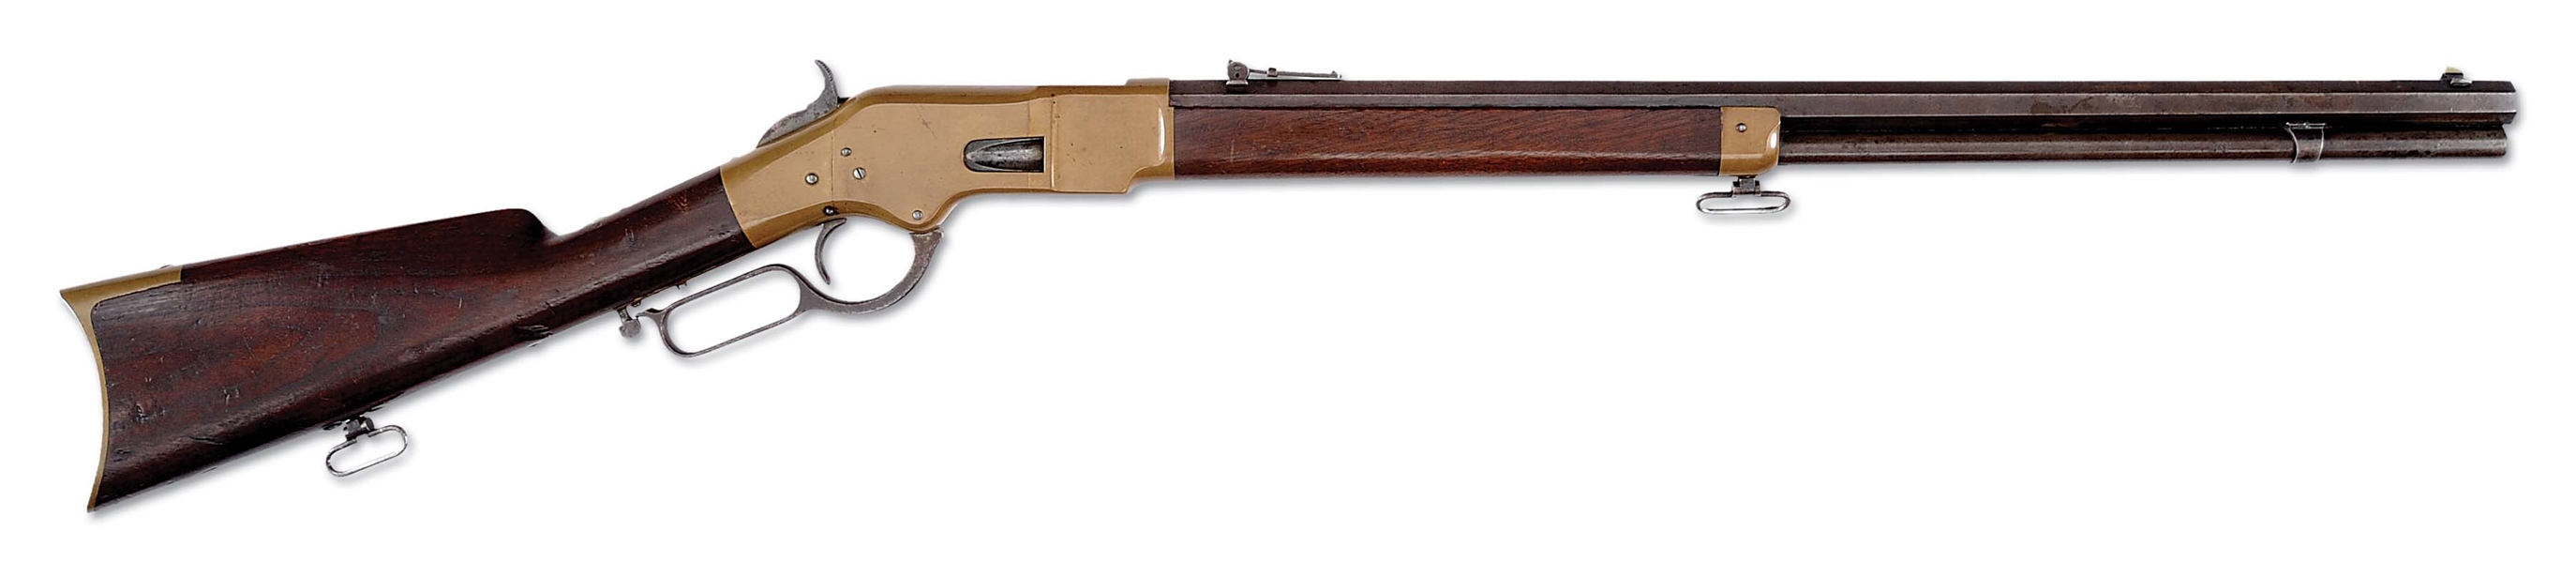 (A) IMPRESSIVE WINCHESTER MODEL 1866 RIFLE WITH LOVELY UNTOUCHED ‘MUSTARD’ COLORED FRAME.